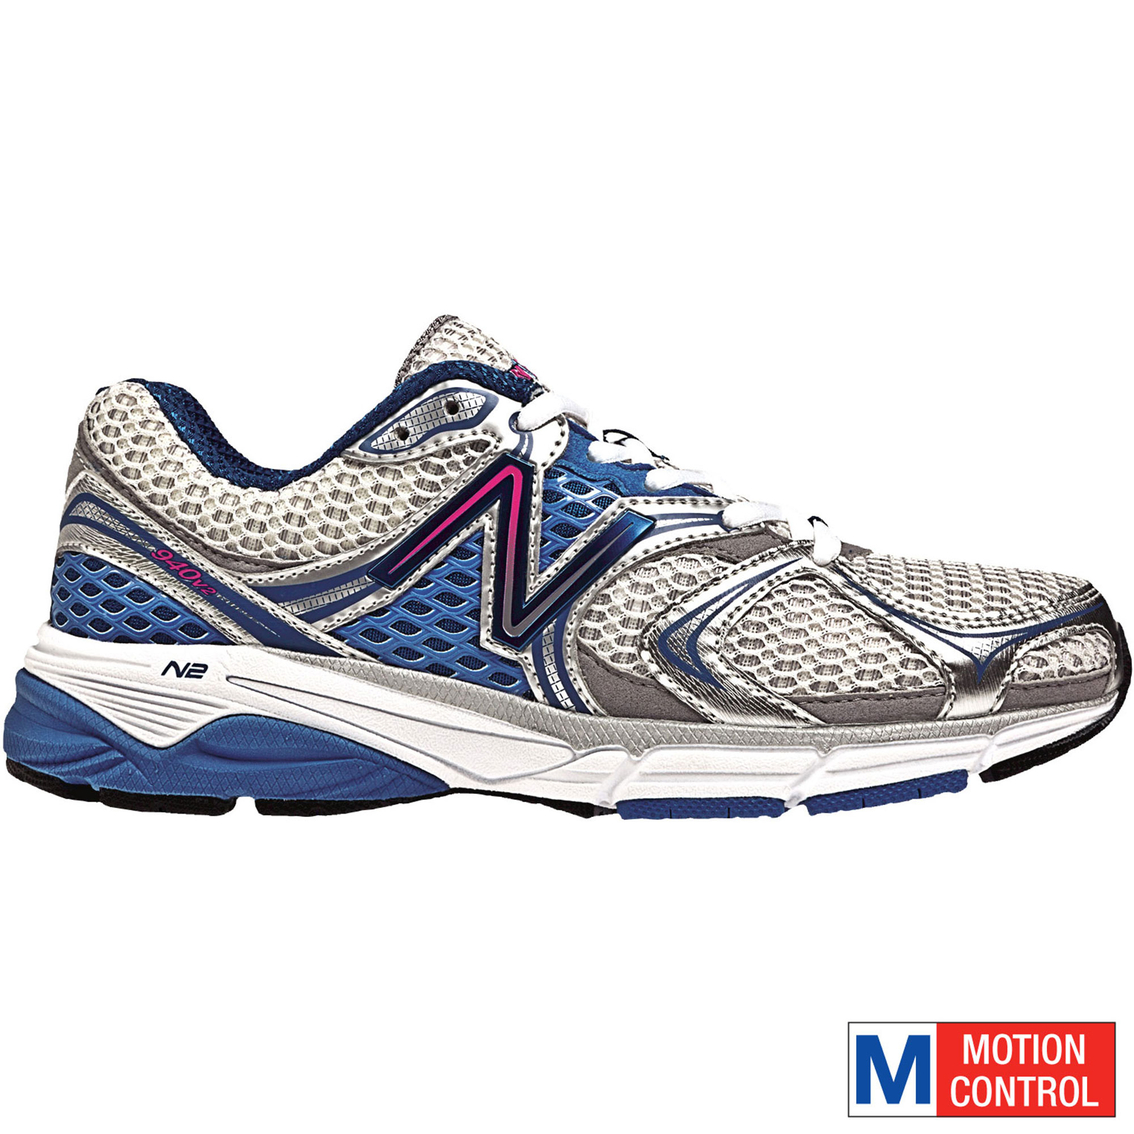 M940wb2 Running Shoes | Running | Shoes 